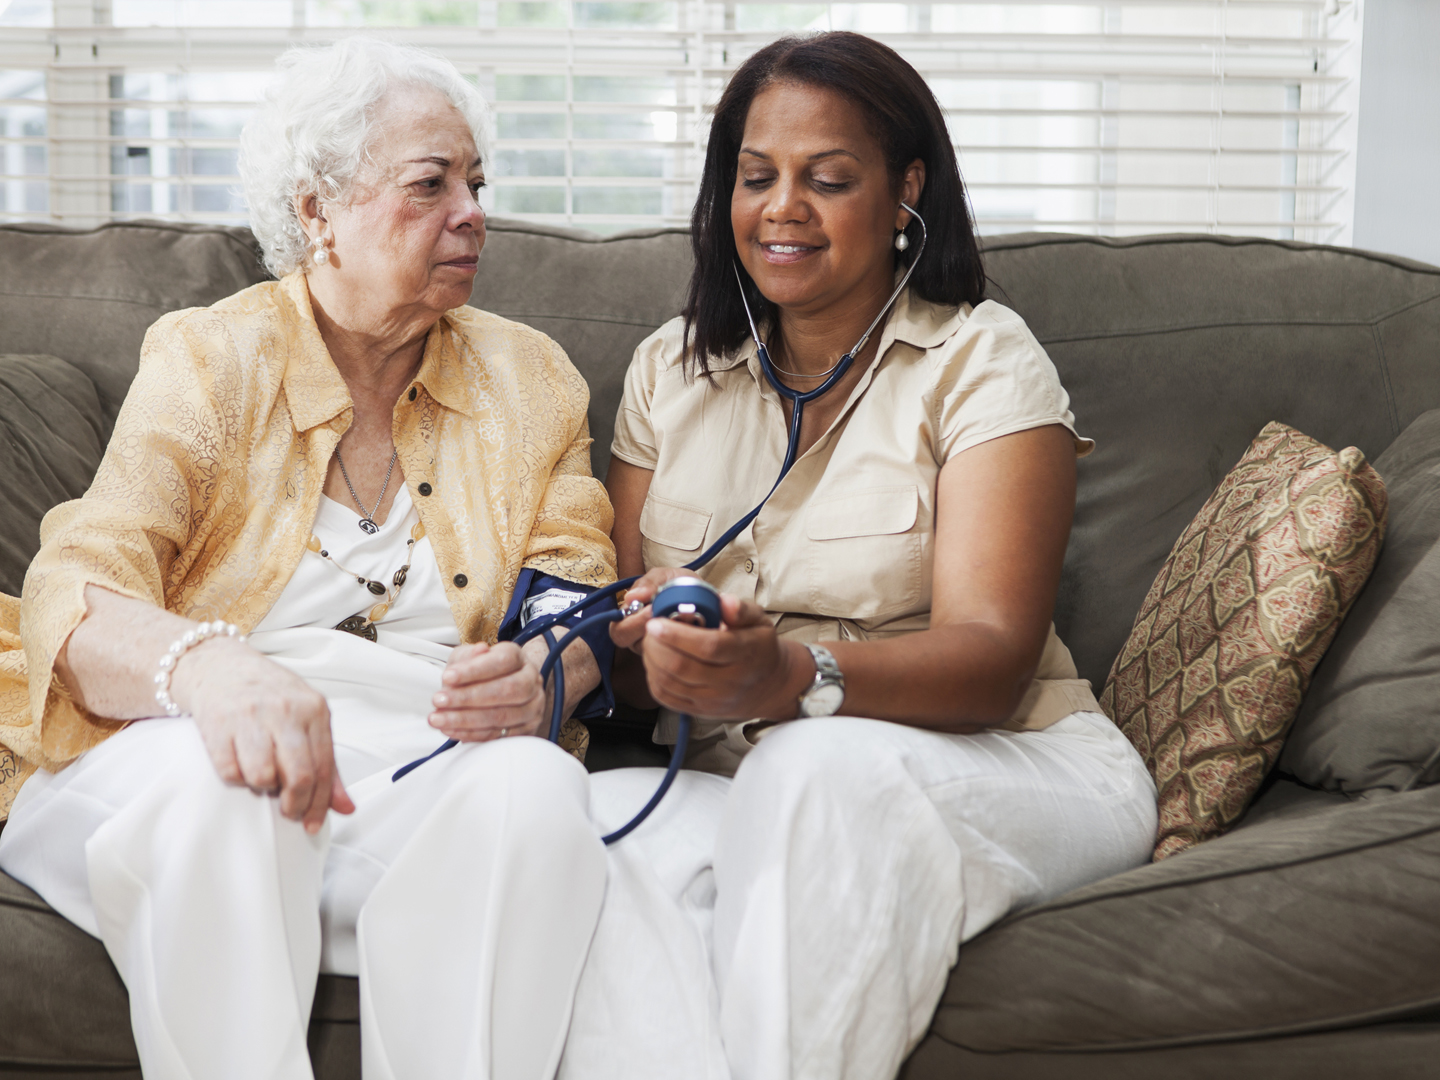 Senior Hispanic woman (70s) with caregiver (50s) at home, taking blood pressure.